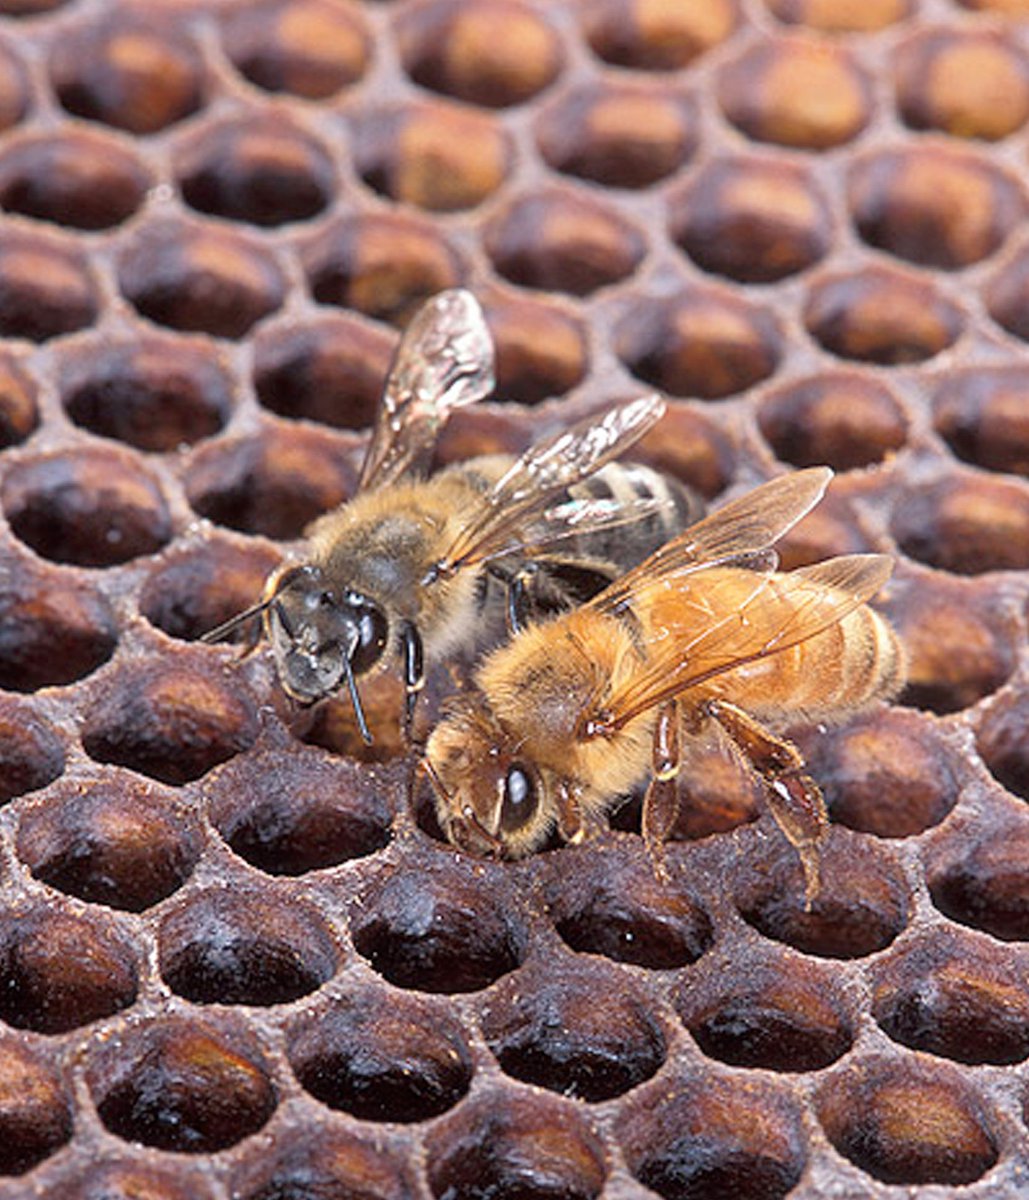 Though some bees are solitary, most bees live in highly structured communities of more than 15,000 individuals. Each of these societies is called a ‘colony’ & cooperates to raise young, collect & store food, & even to produce honey!  https://myanimals.com/animals/wild-animals-animals/invertebrates/the-amazing-and-complex-social-structure-of-bees/ Scott Bauer